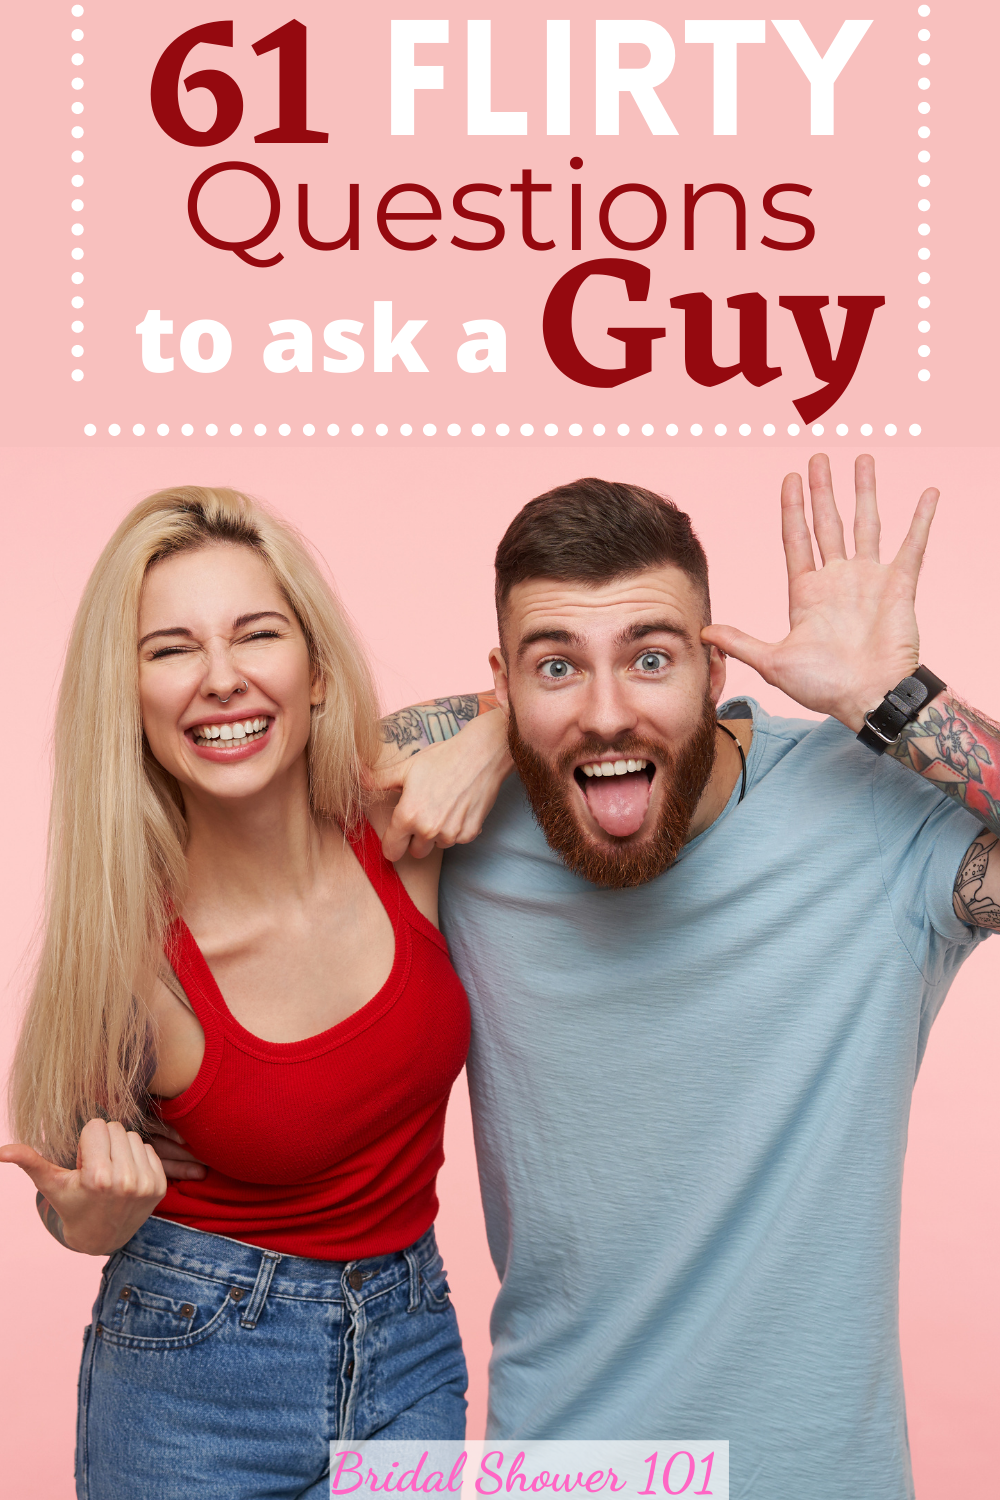 flirty questions to ask a guy to get to know him deeper